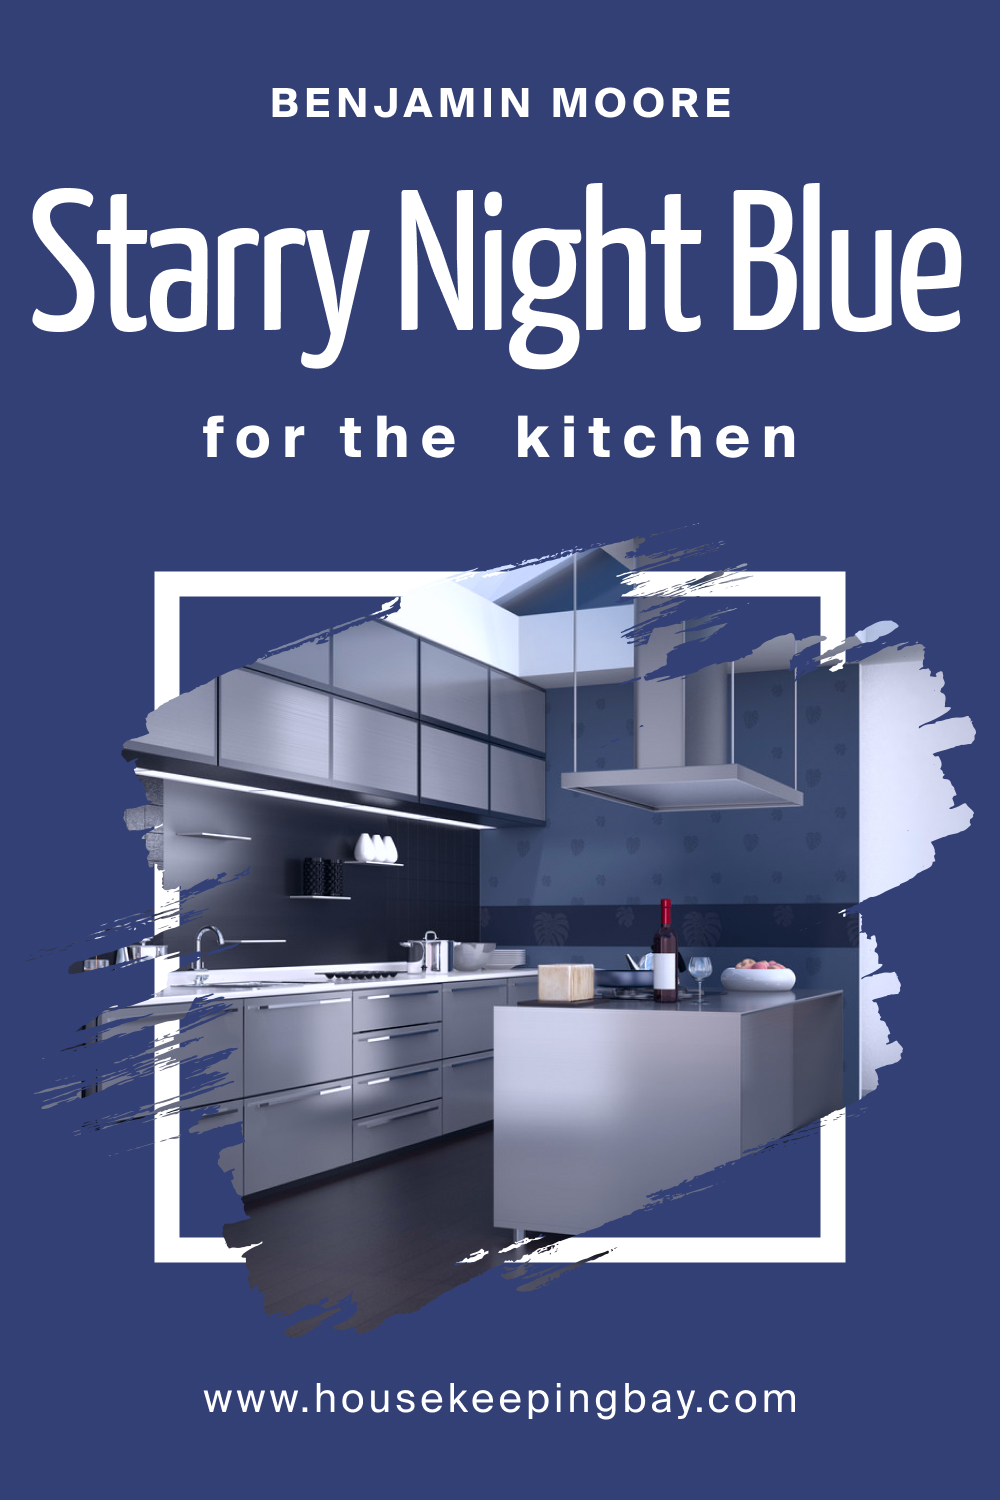 Benjamin Moore. Starry Night Blue 2067 20 for the Kitchen